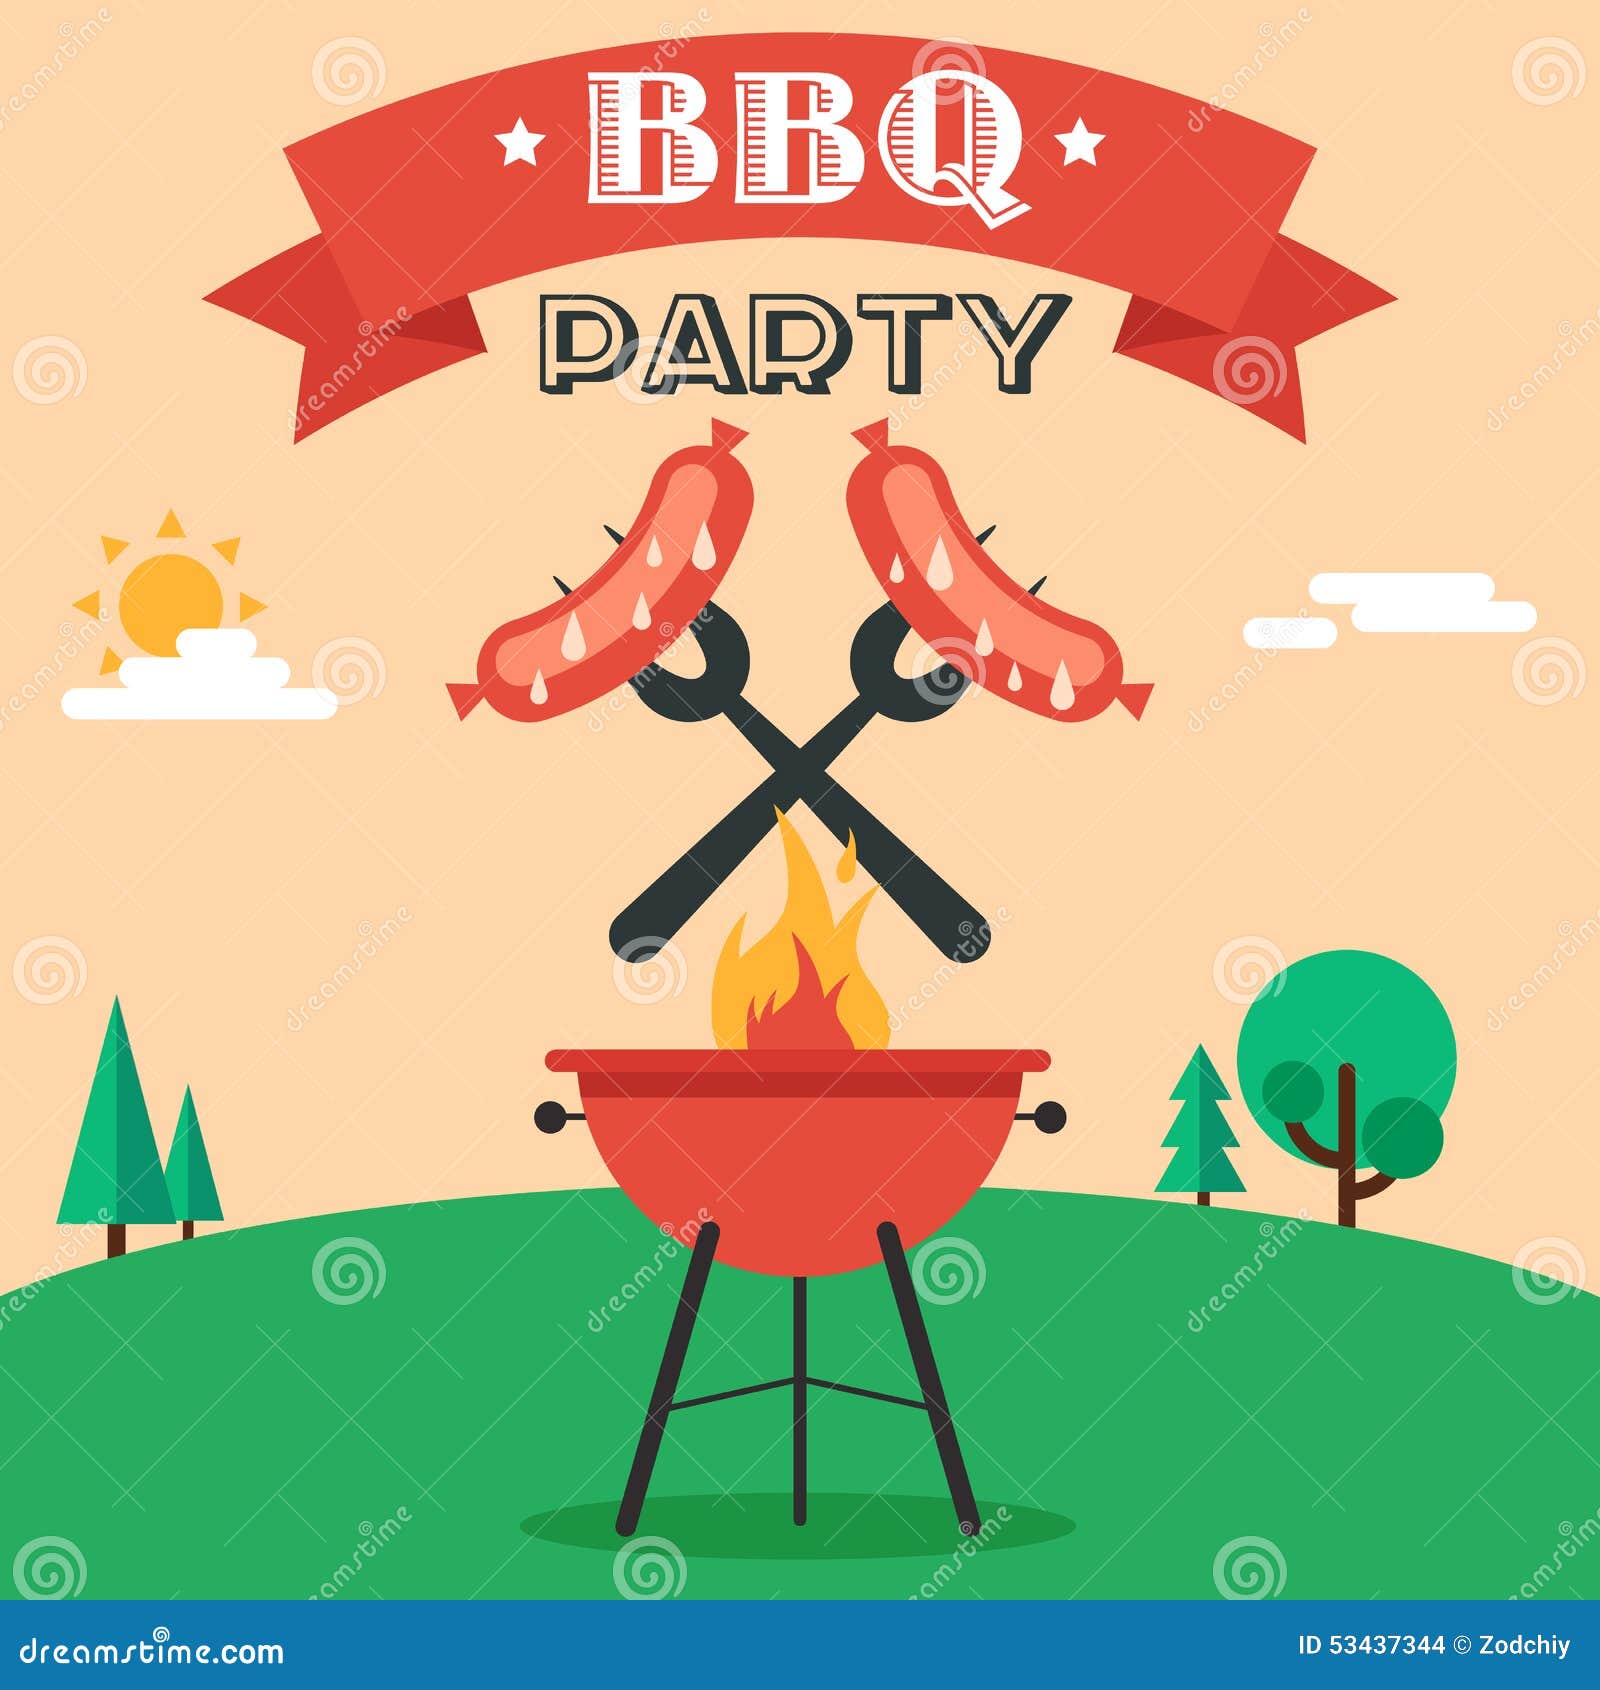 Bbq Party Invitation Stock Vector Illustration Of Grilling 53437344